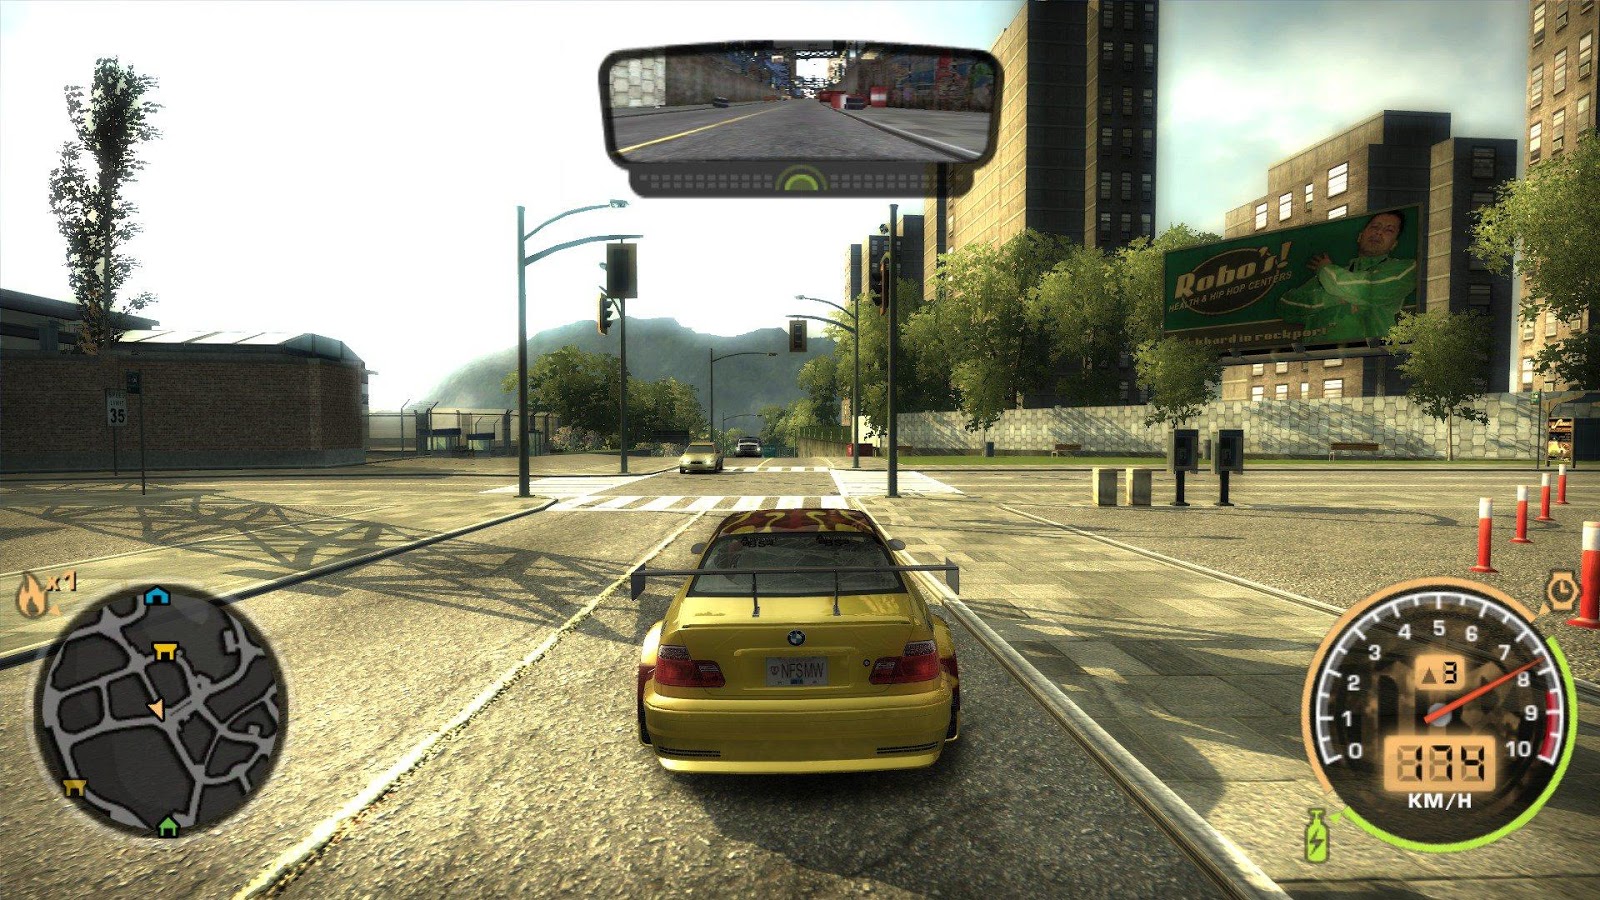 need for speed most wanted 2005 pc download